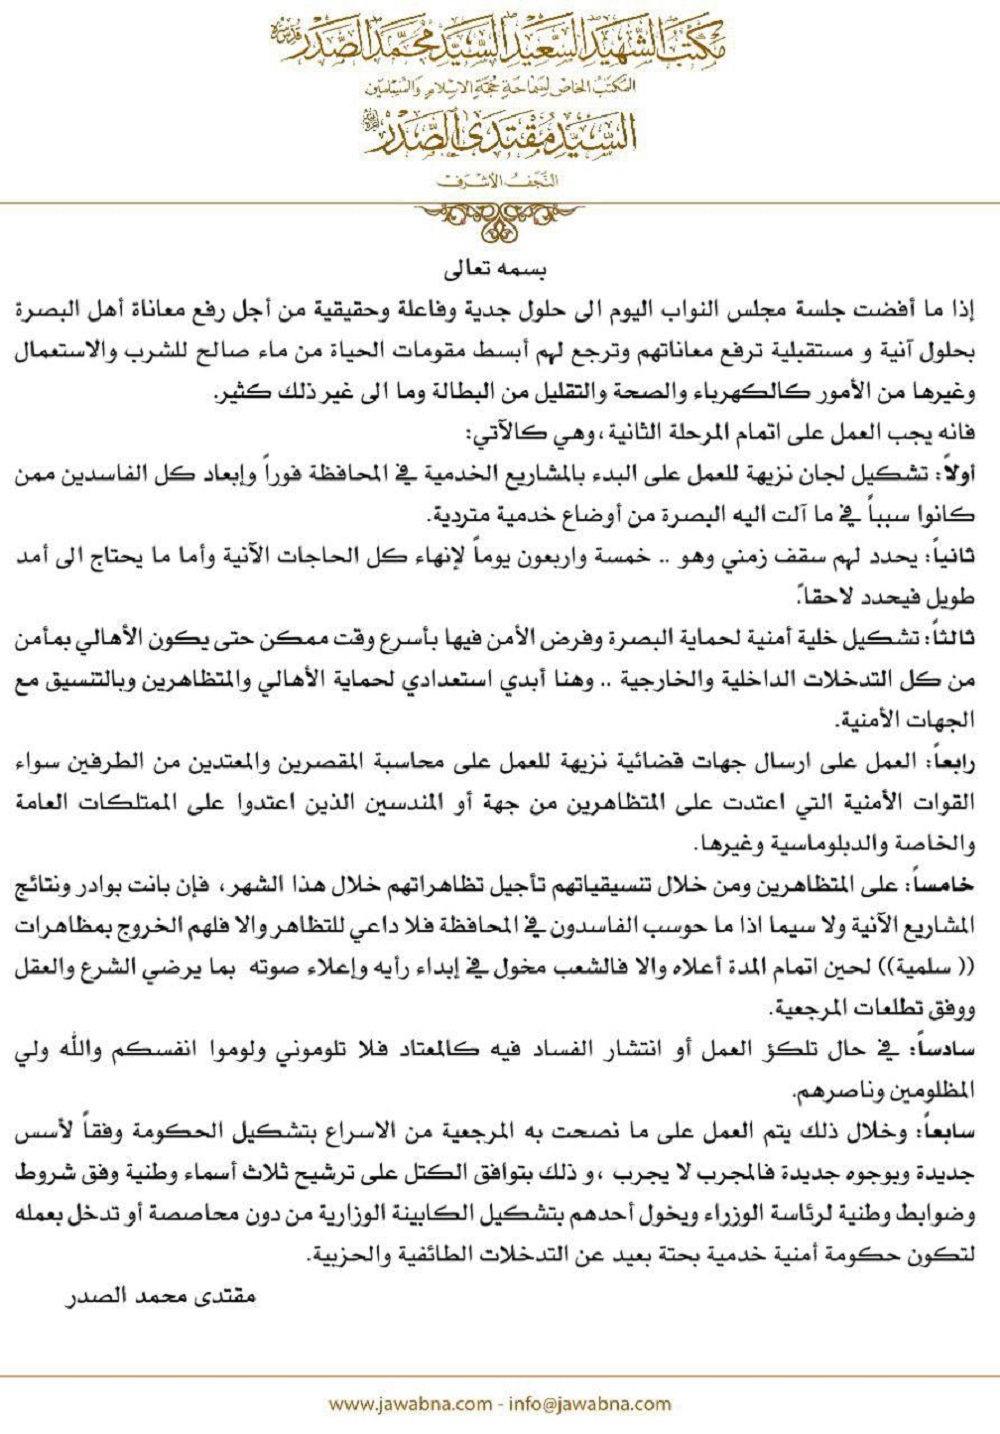 Sadr sets a road map to solve the problem of Basra and vows to protect its own security and exclude Abadi from the presidency of the government